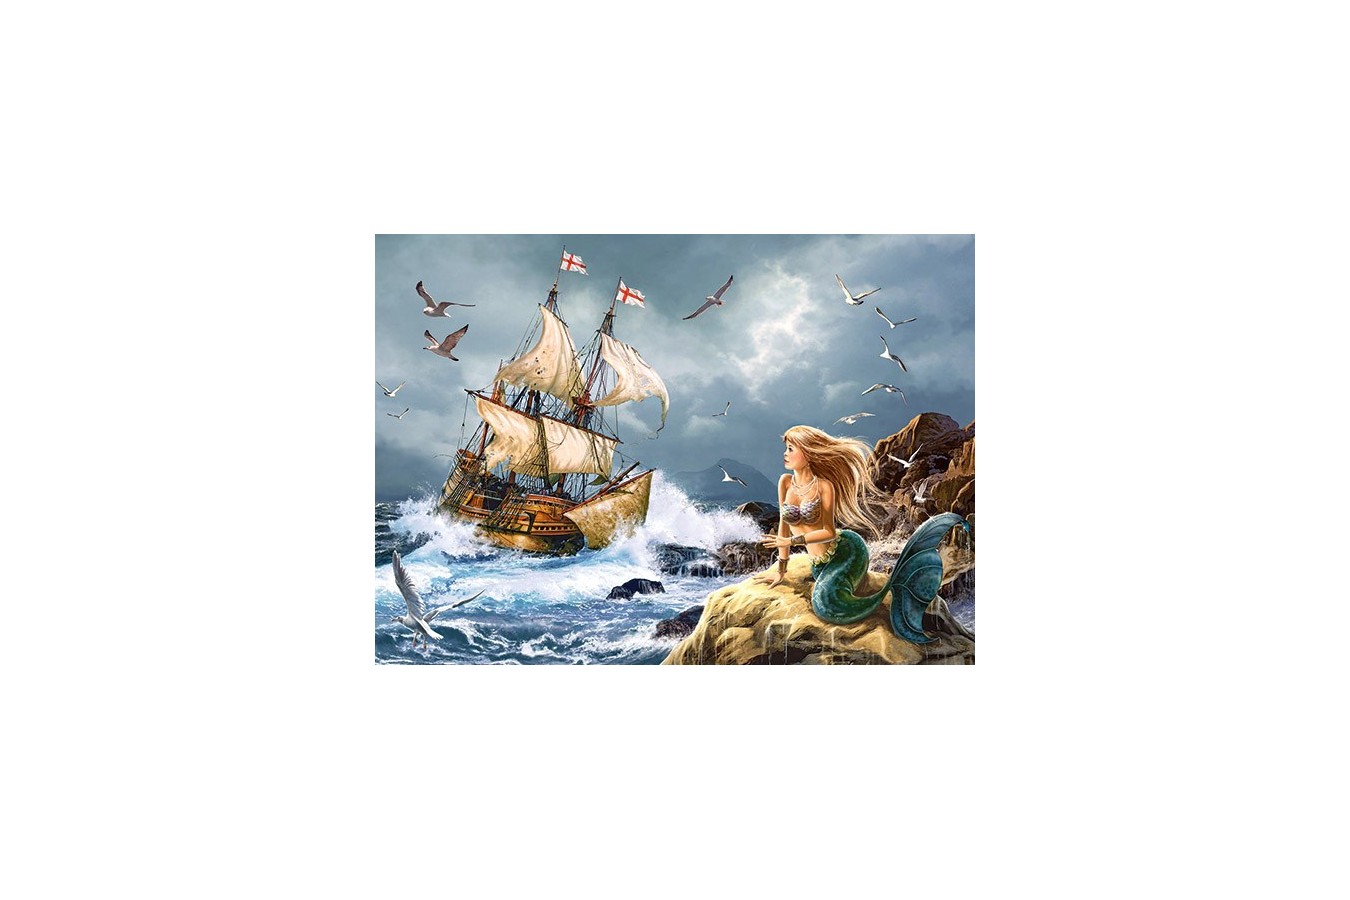 Puzzle Castorland - Misteries of the Sea, 120 piese